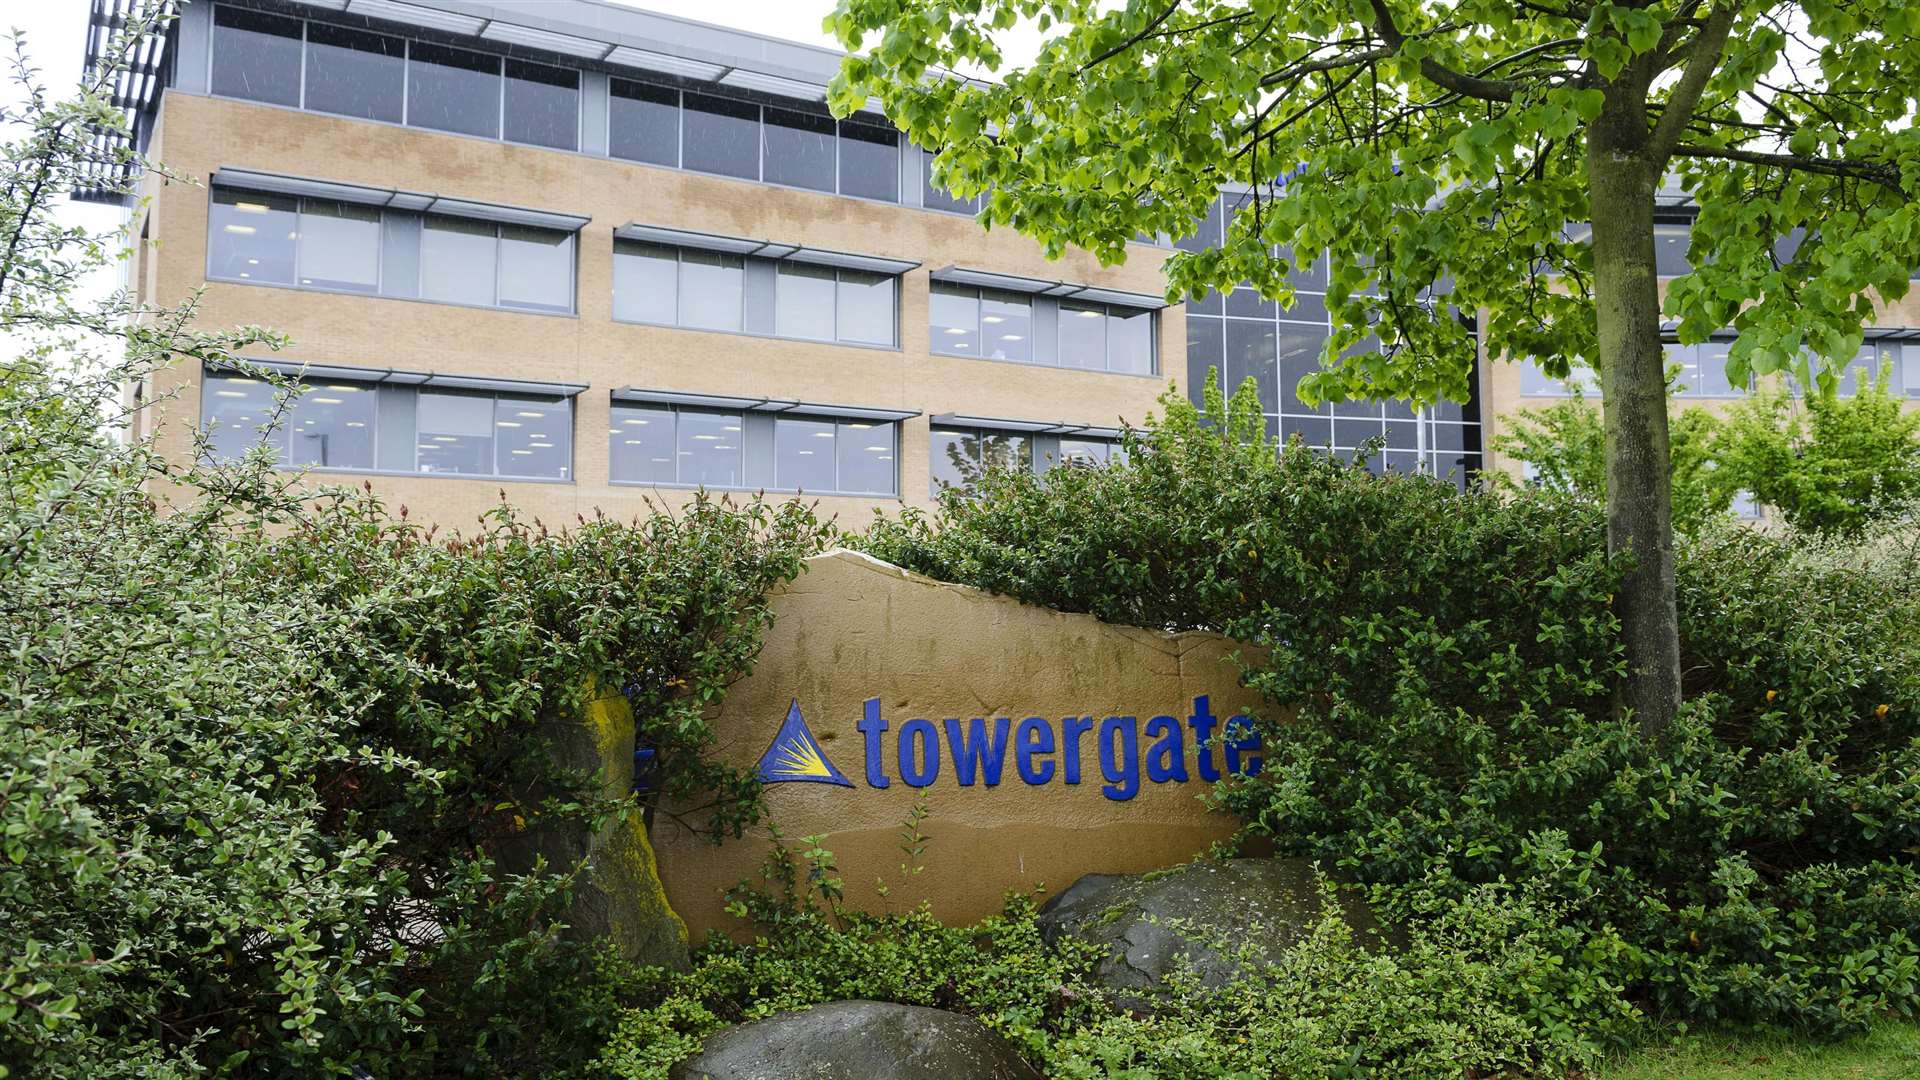 Towergate has been merged into insurance conglomerate KIRS Group